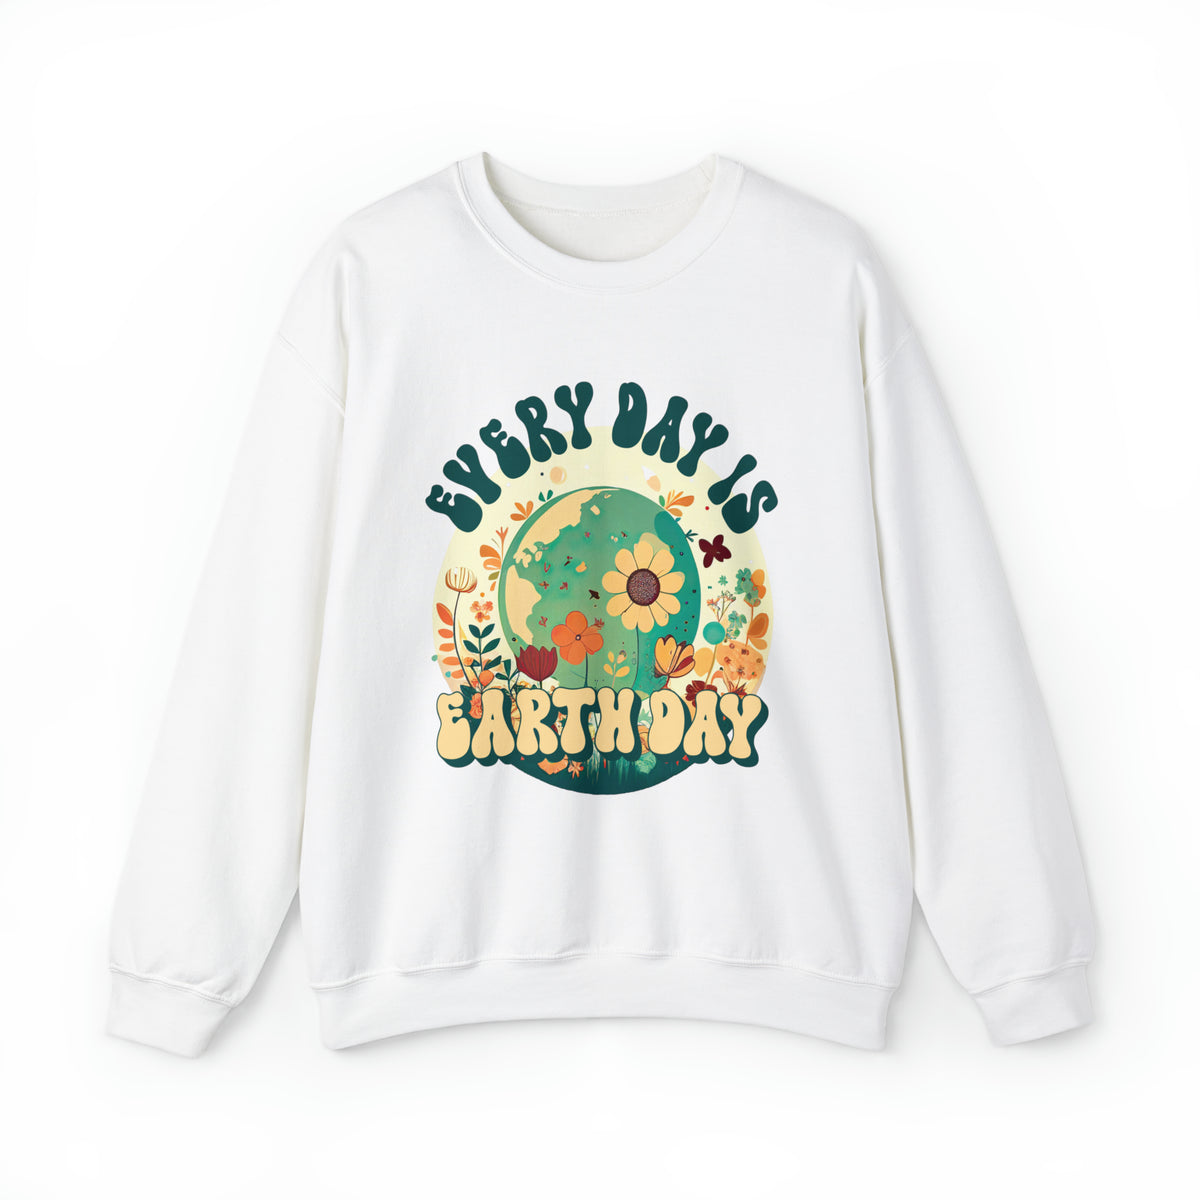 Every Day Is Earth Day Shirt | Mother Earth Flower shirt | Nature Shirt | Gift For Her | Unisex Crewneck Sweatshirt